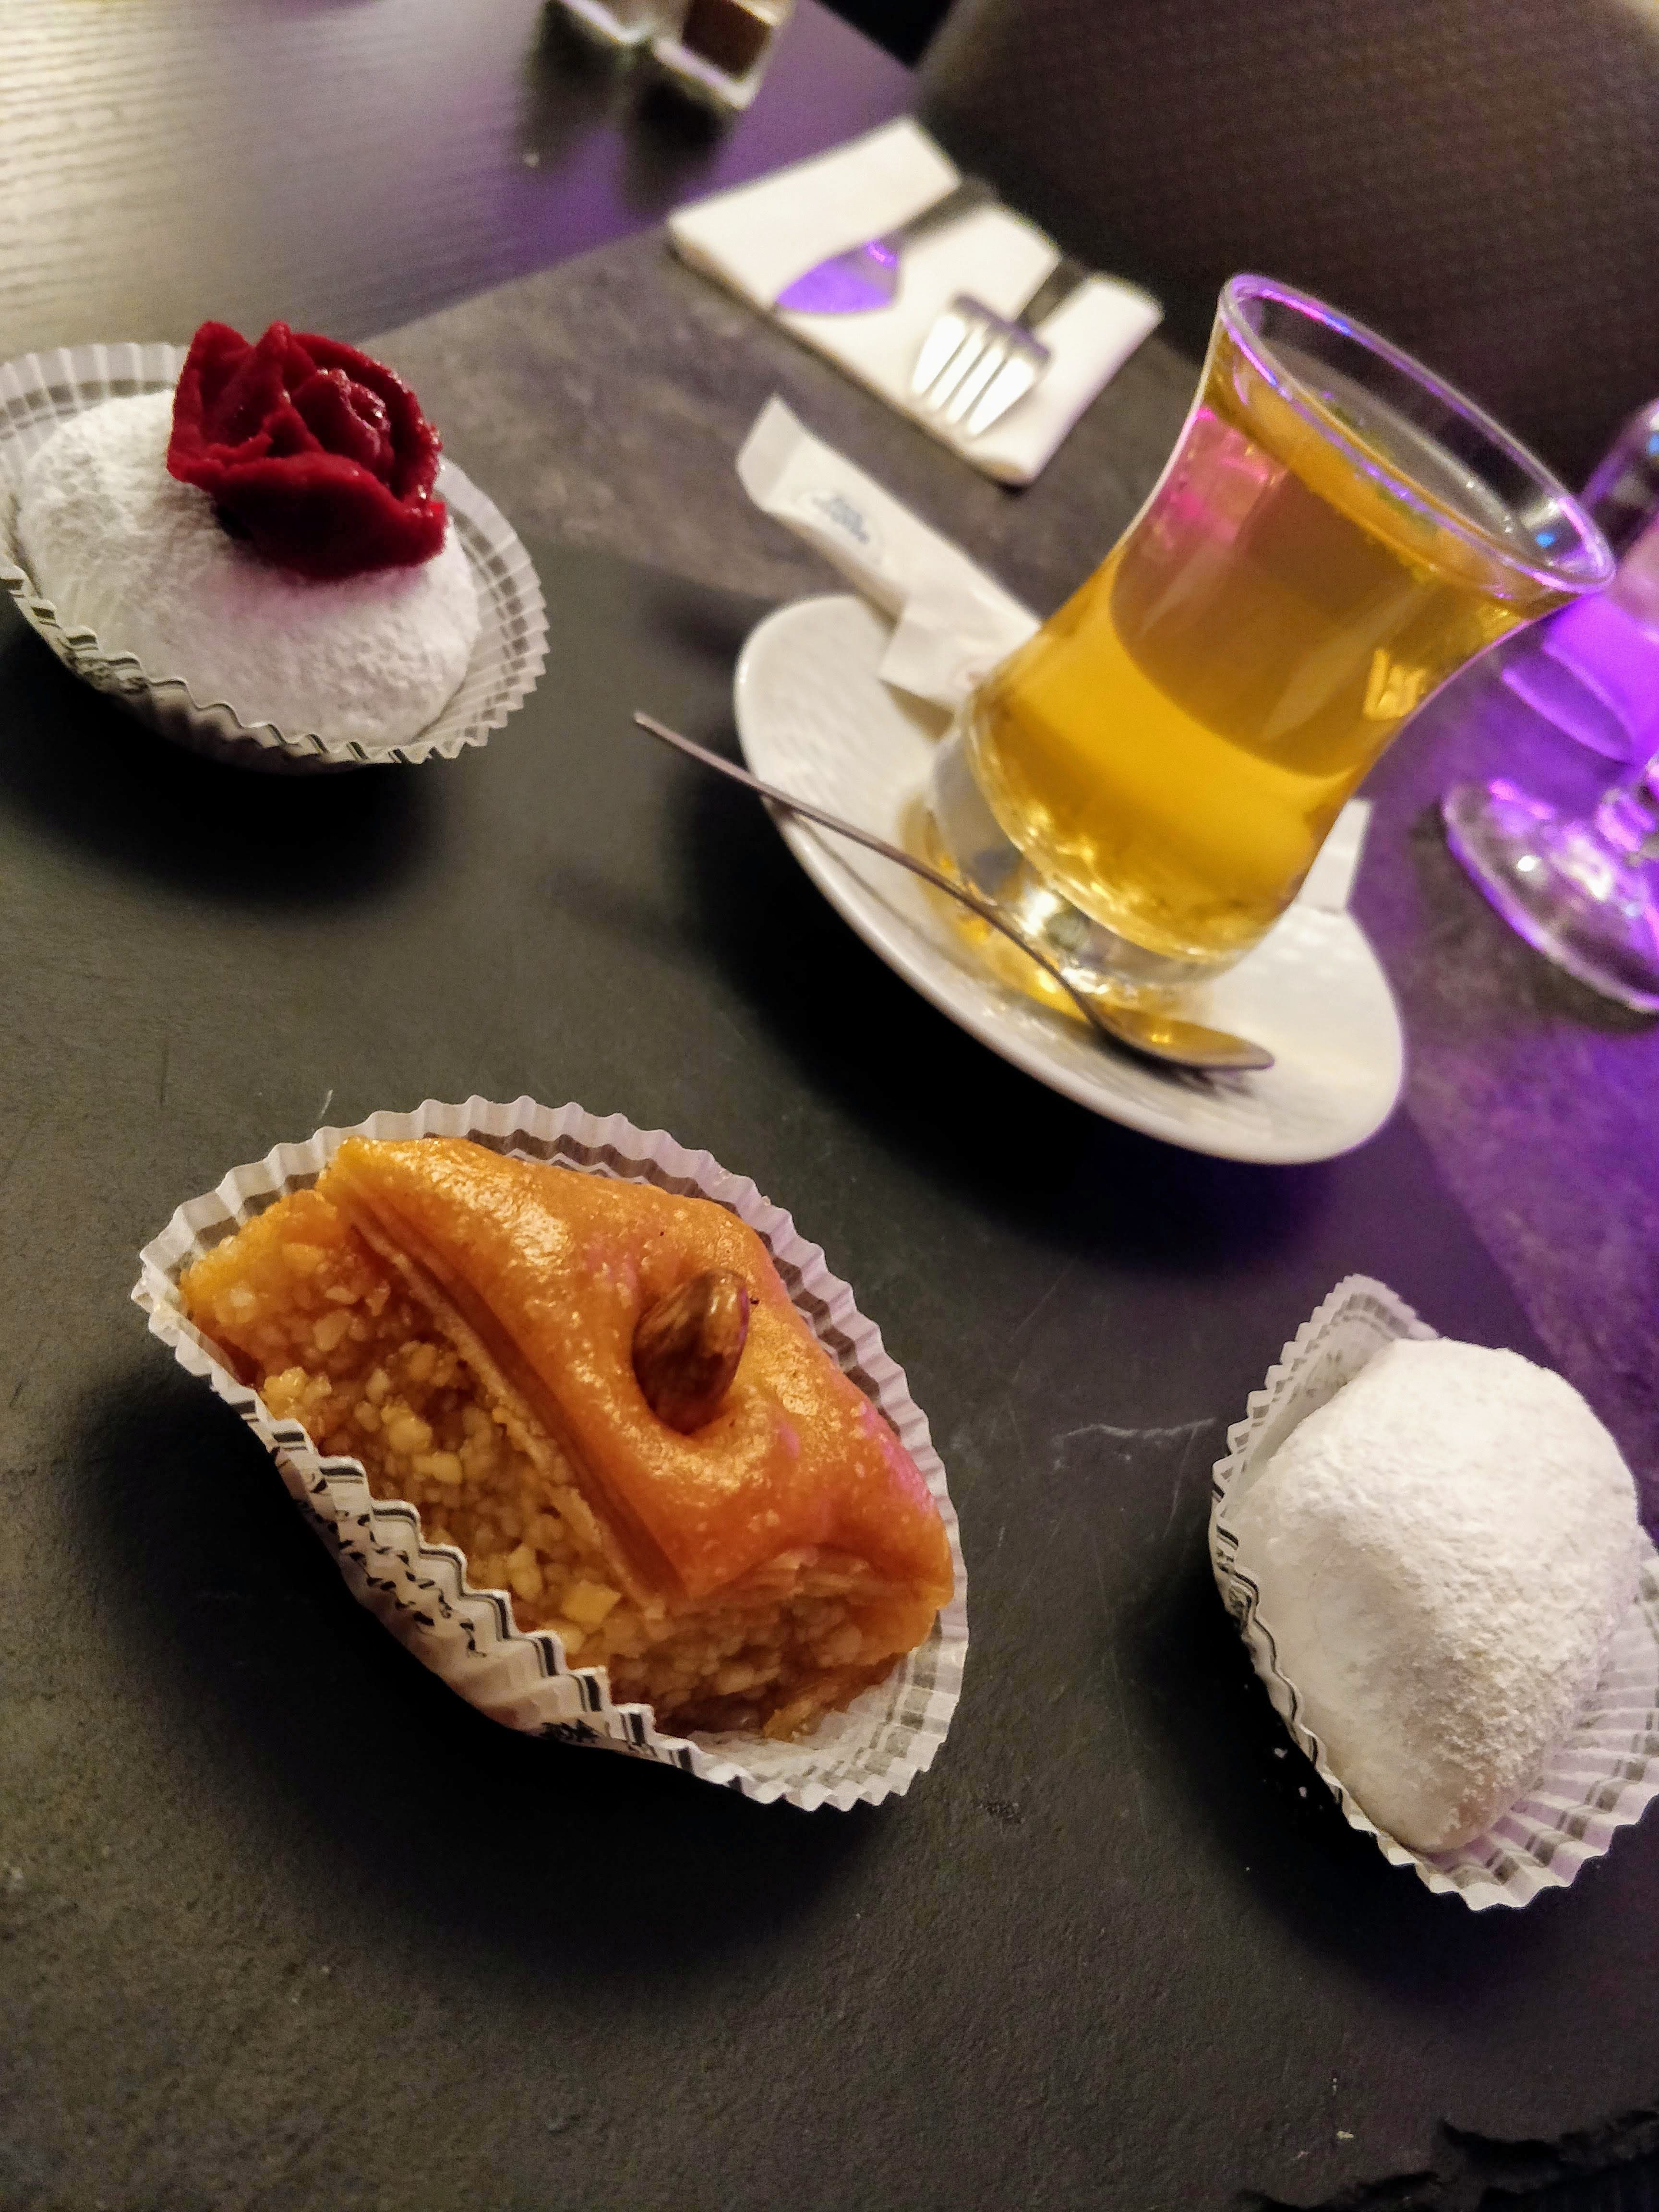 Gourmand tea (typical in France: a tea or coffee accompanied by three small portions of different desserts).